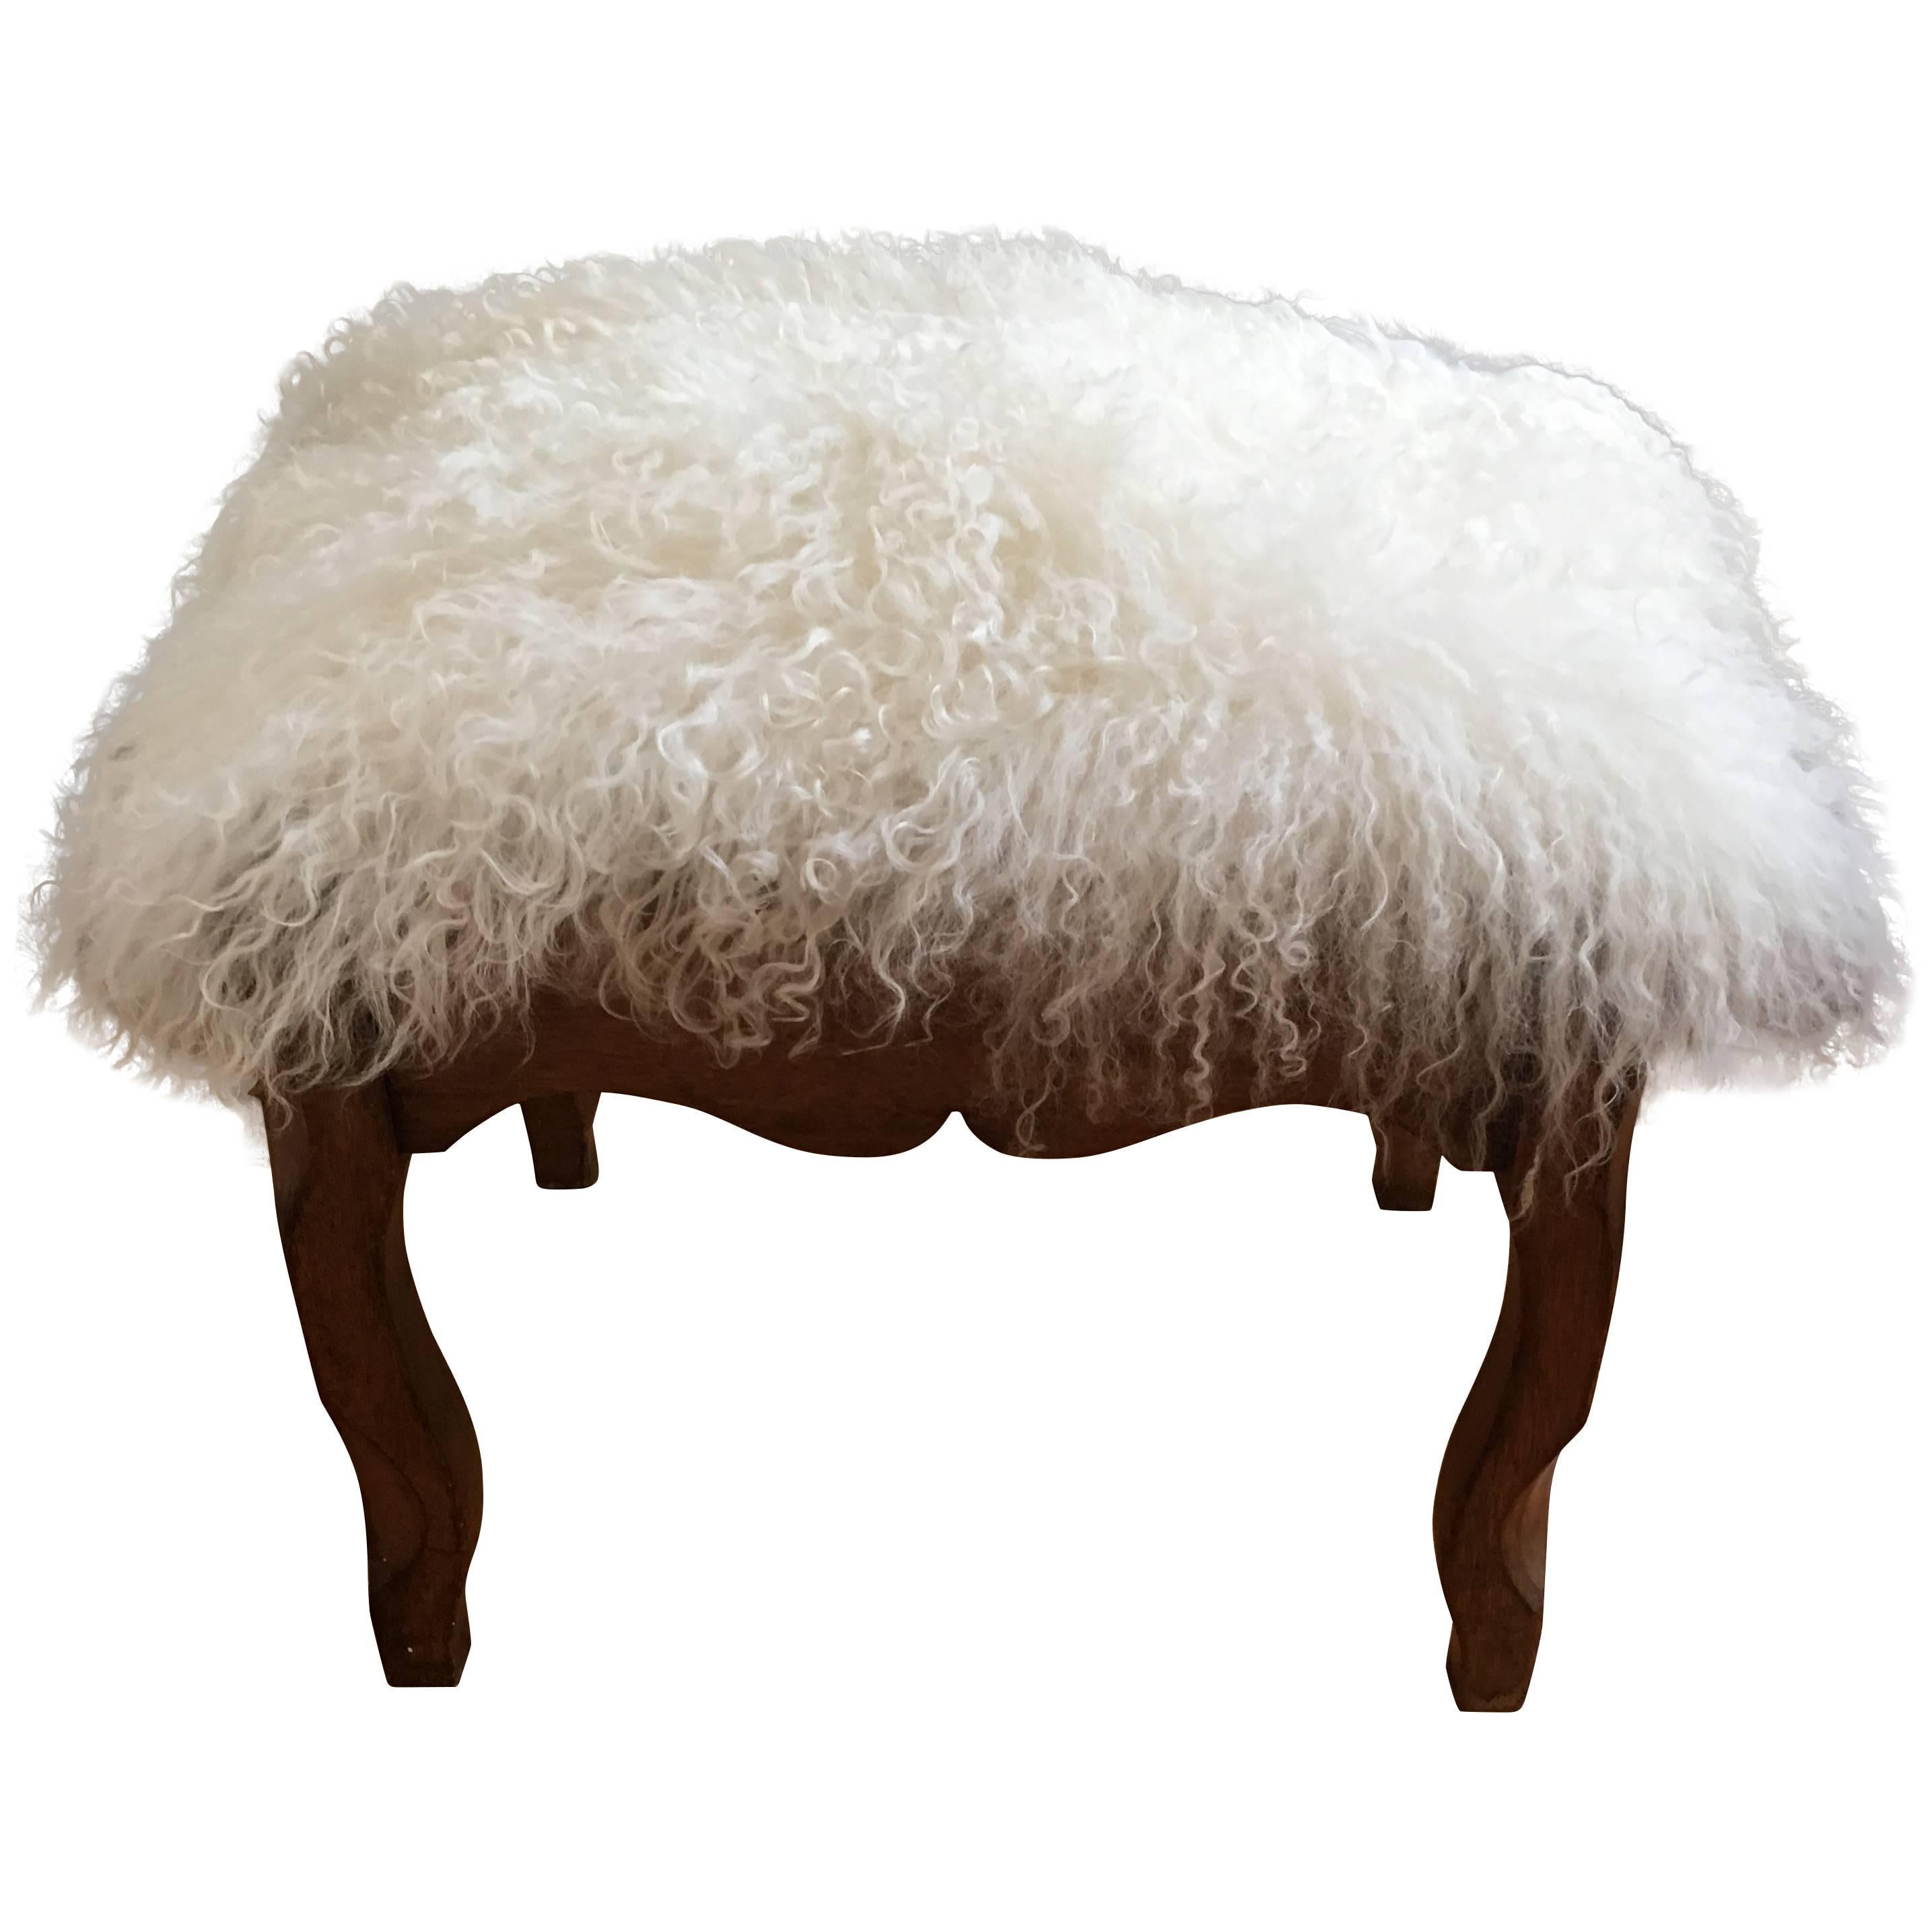 Carved Wooden Step Stool with Yak Fur